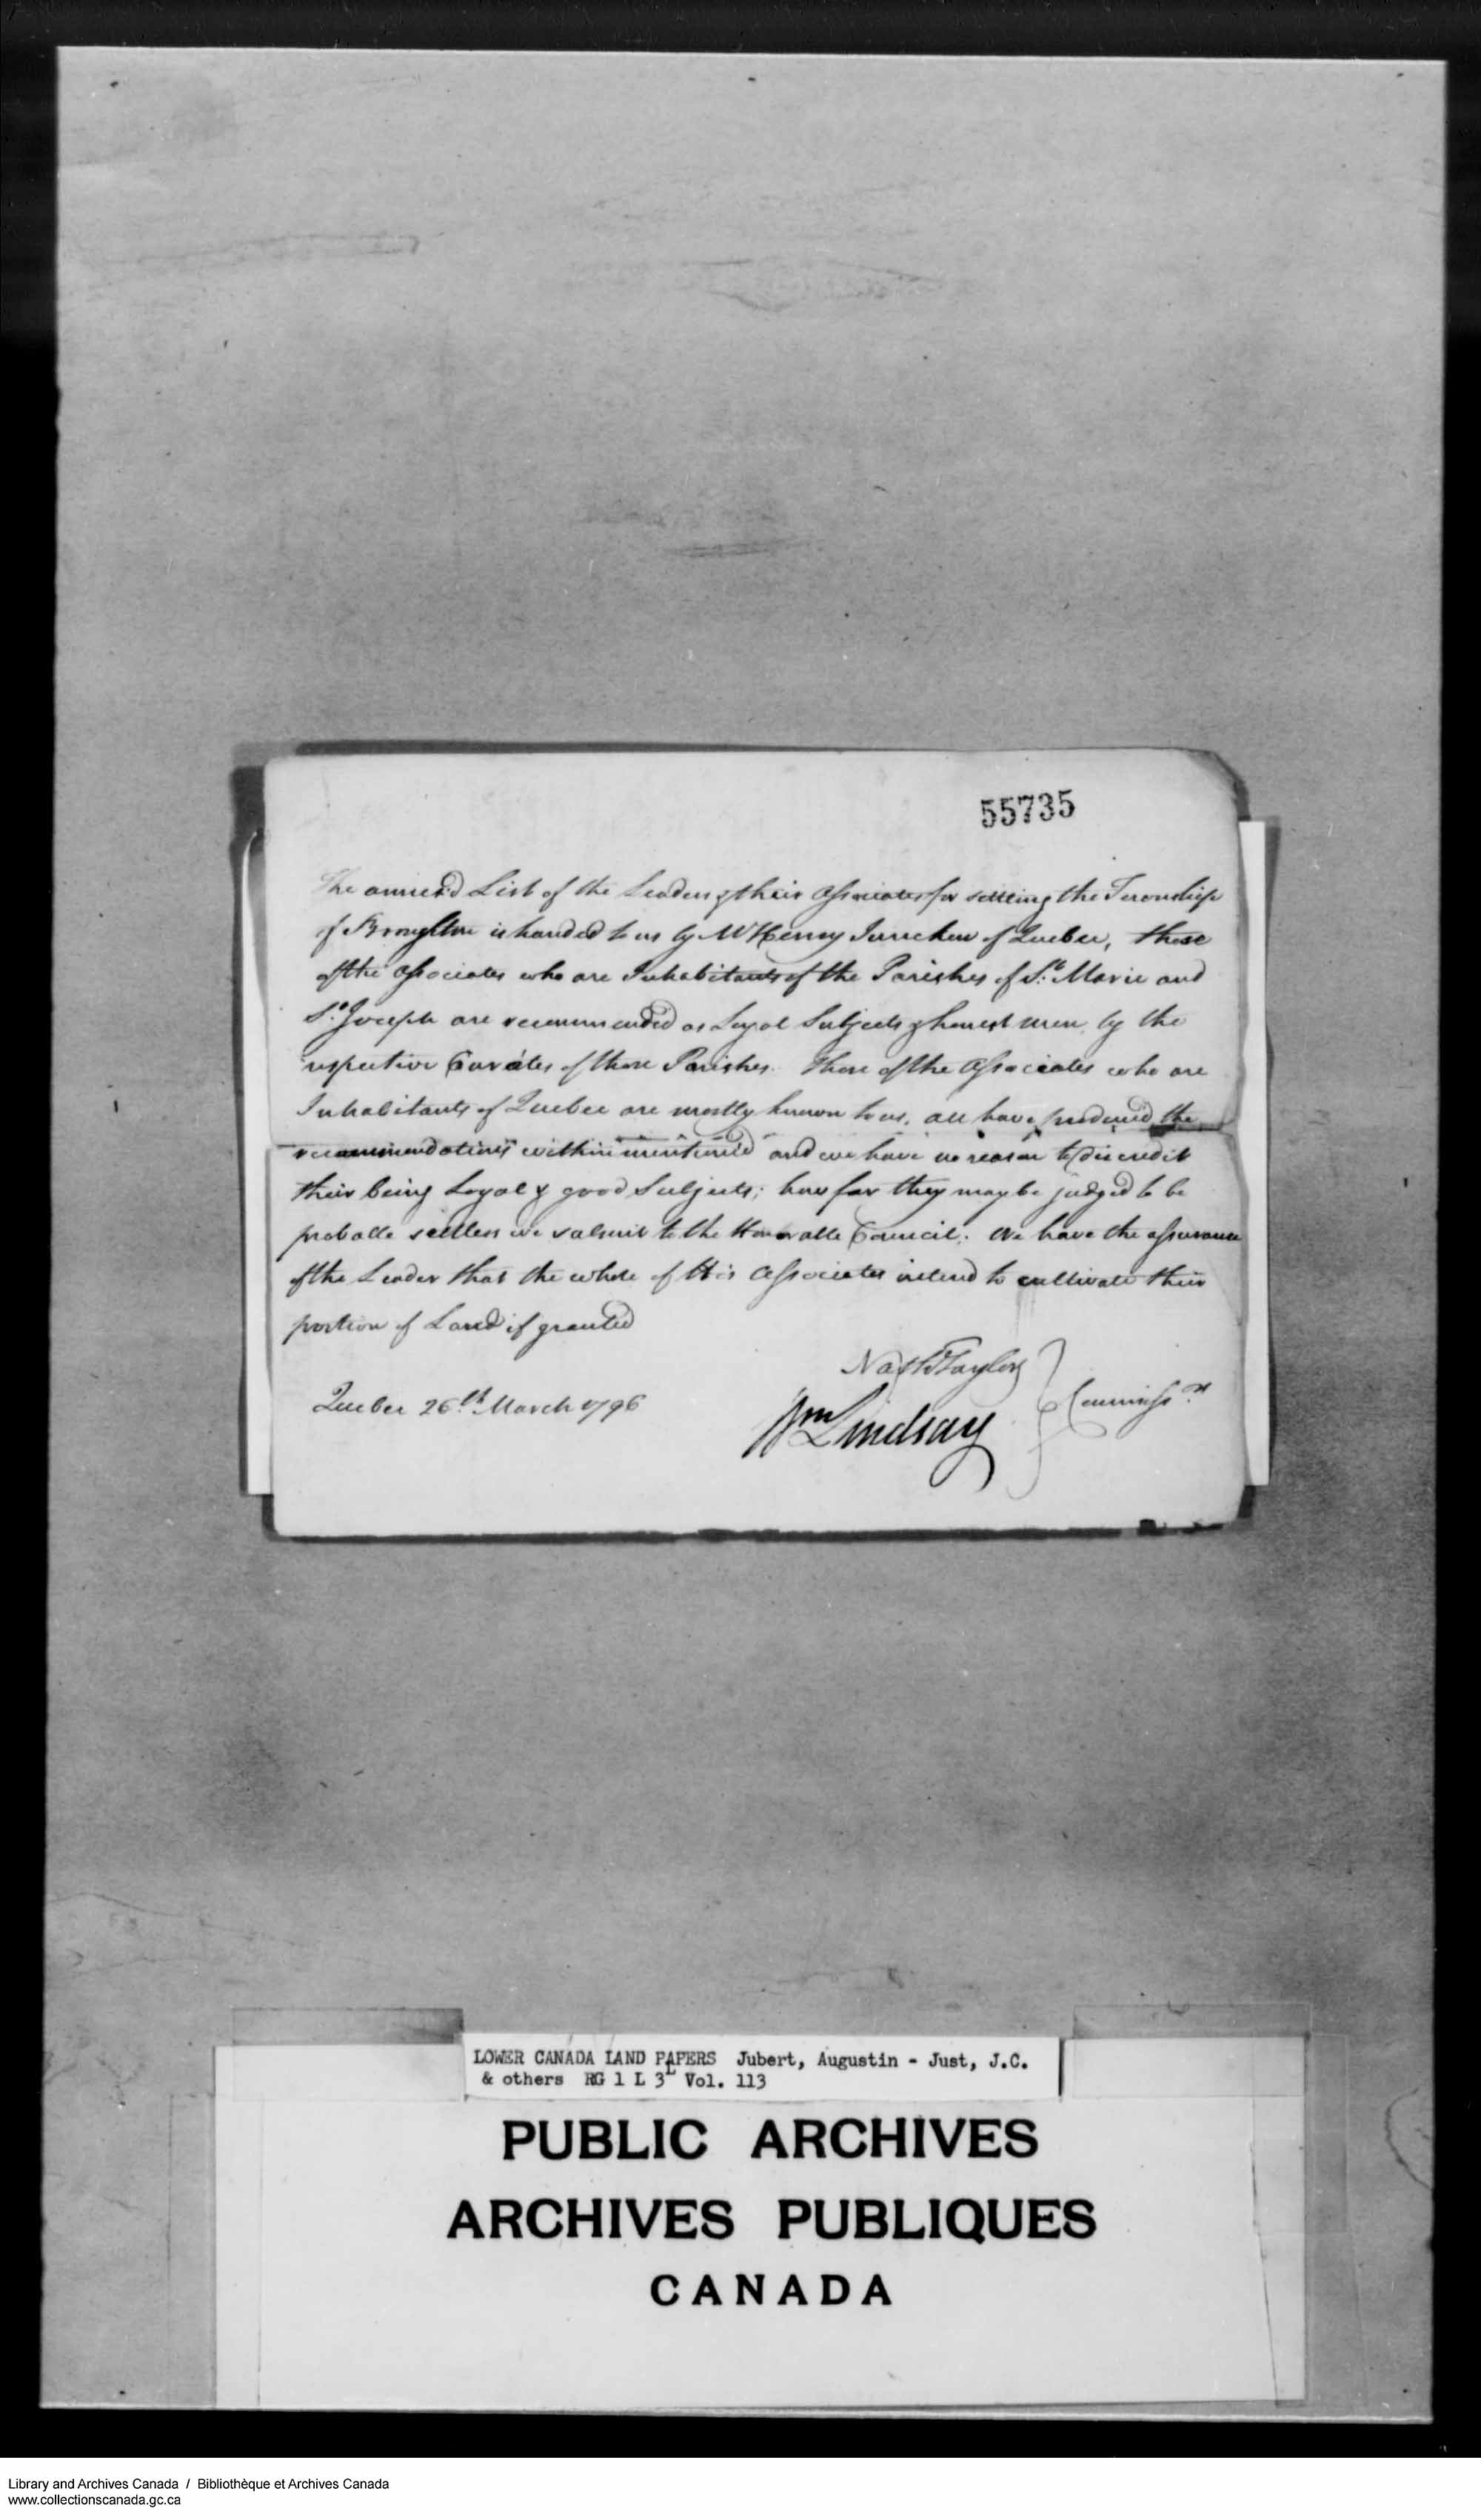 Digitized page of  for Image No.: e008700223